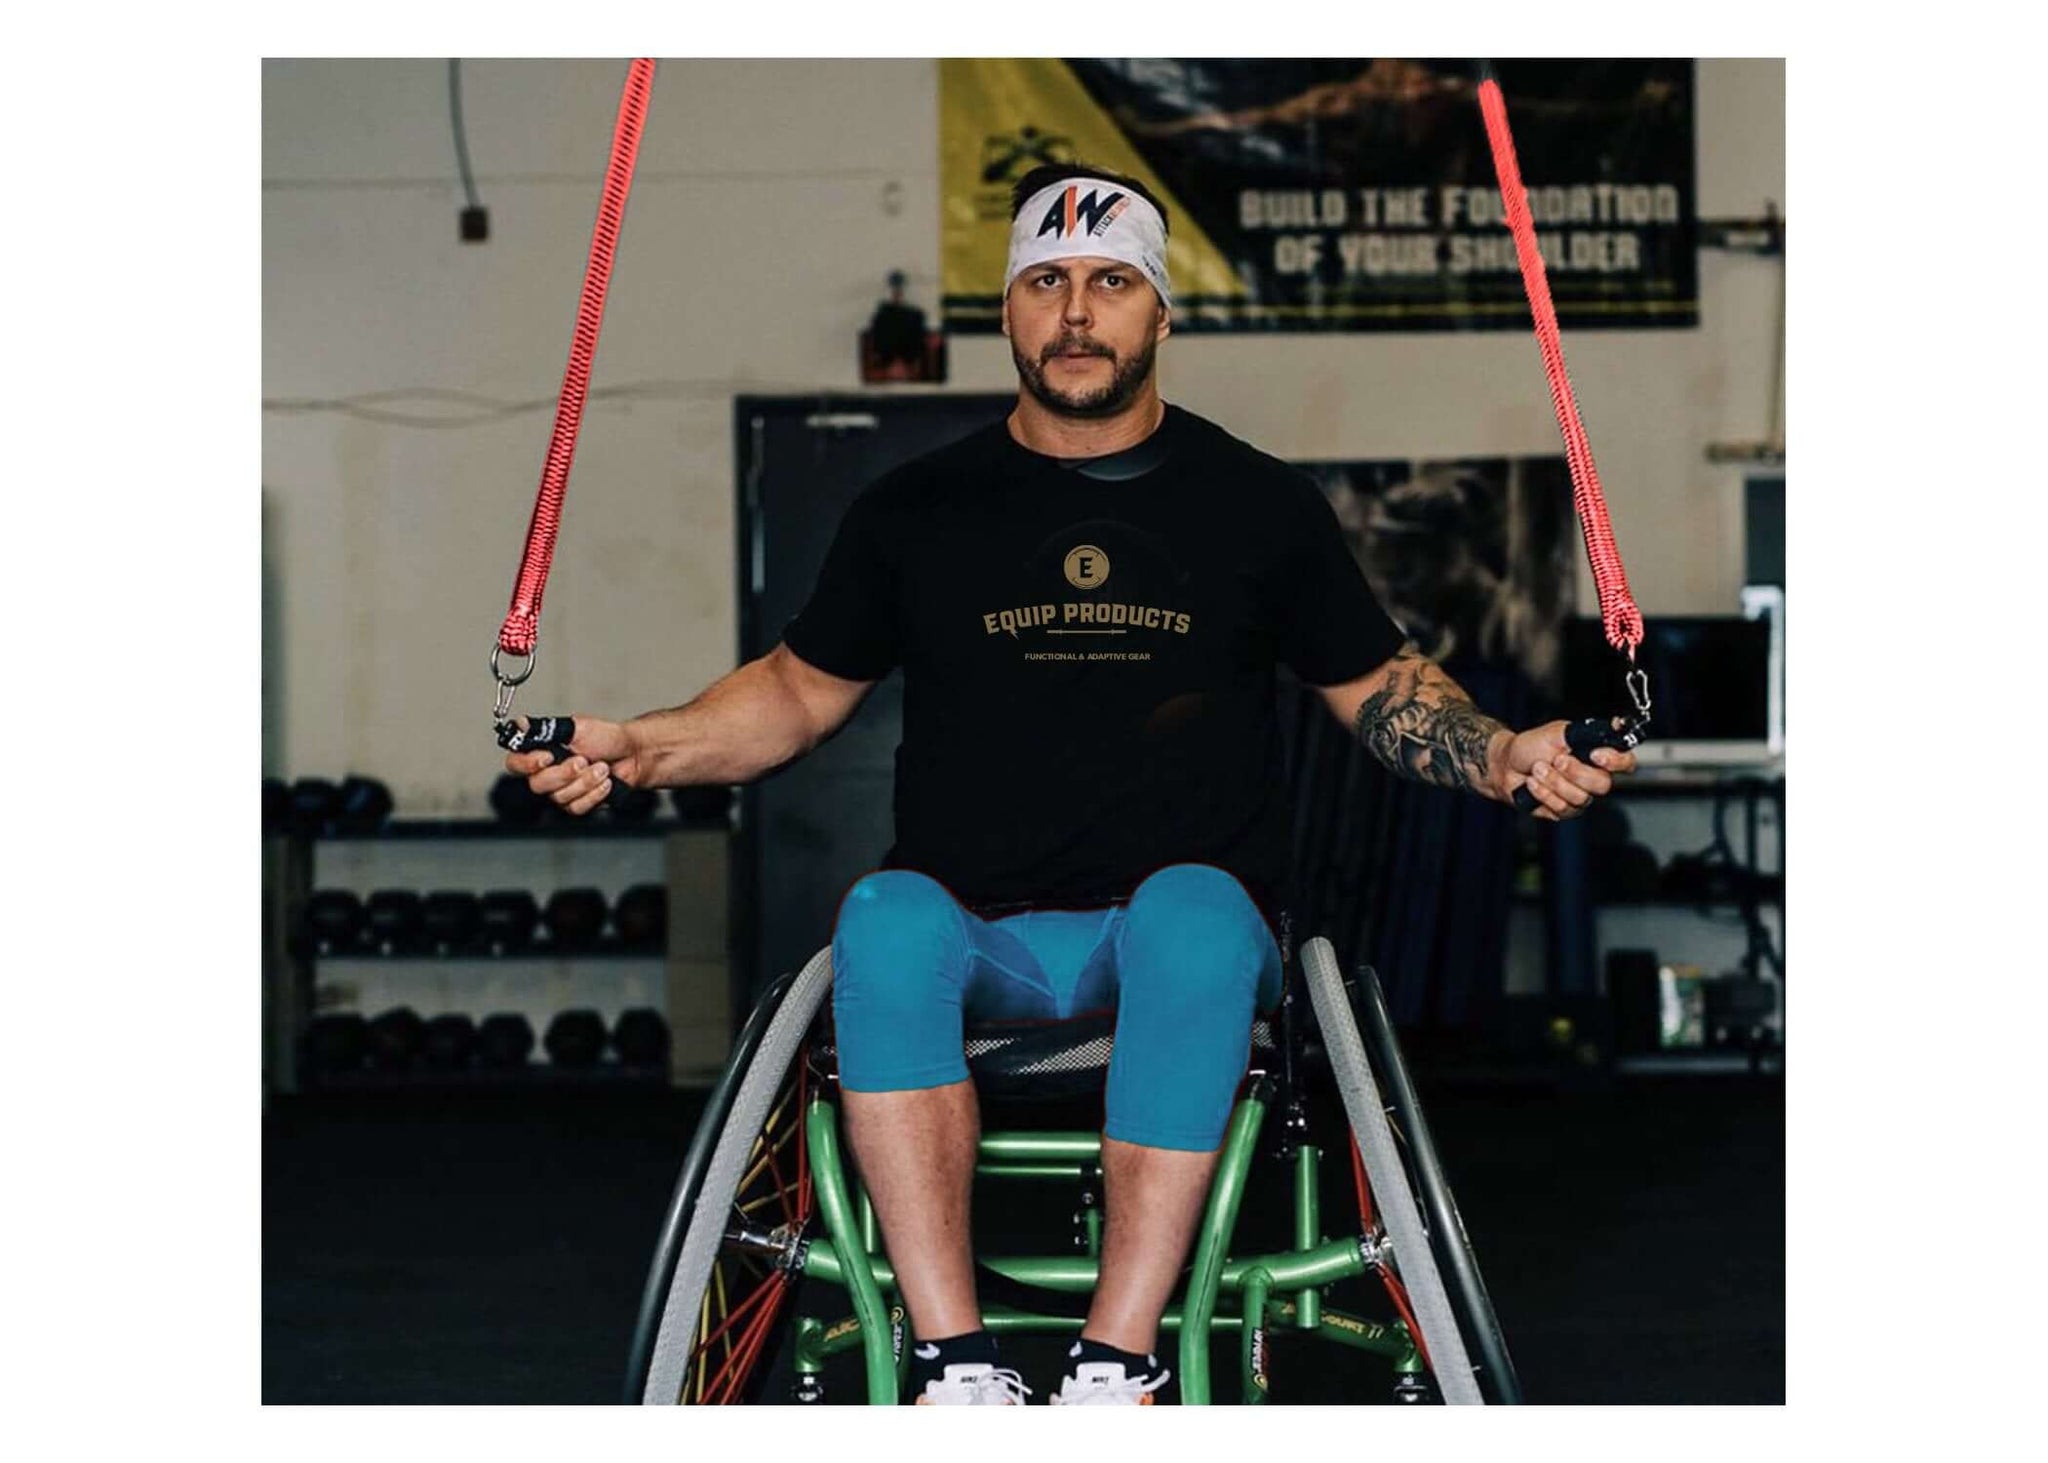 Multi Ropes in use by Jed Snelson who is the fittest seated athlete in the world.